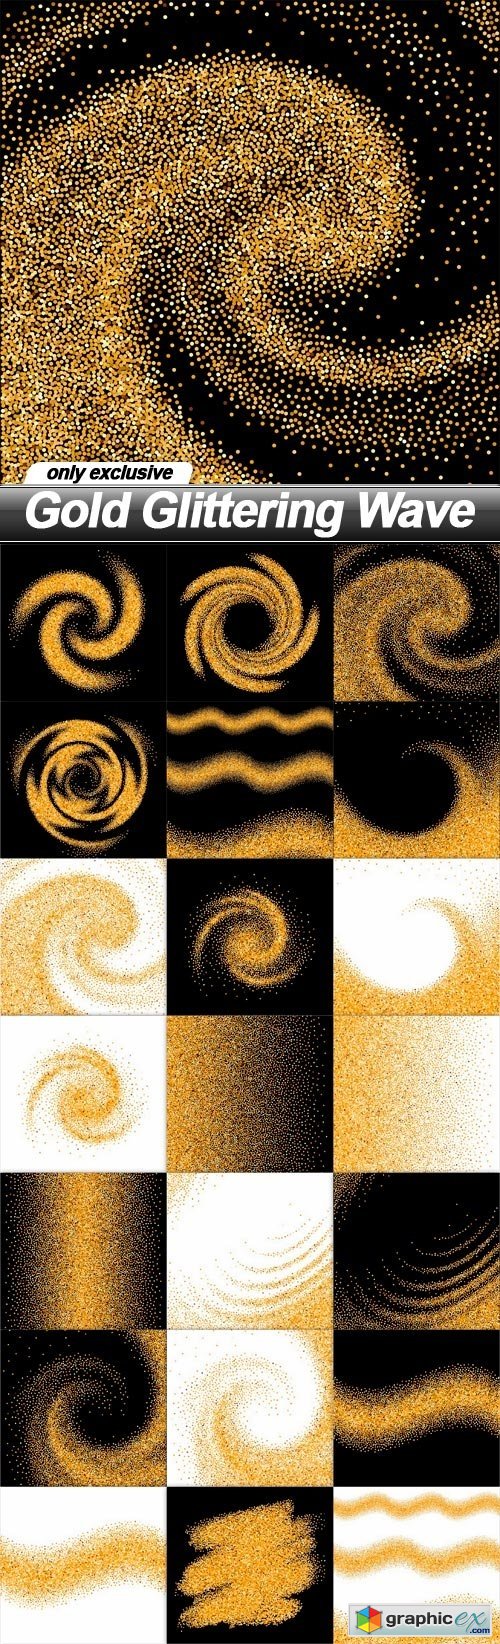 Gold Glittering Wave - 21 EPS